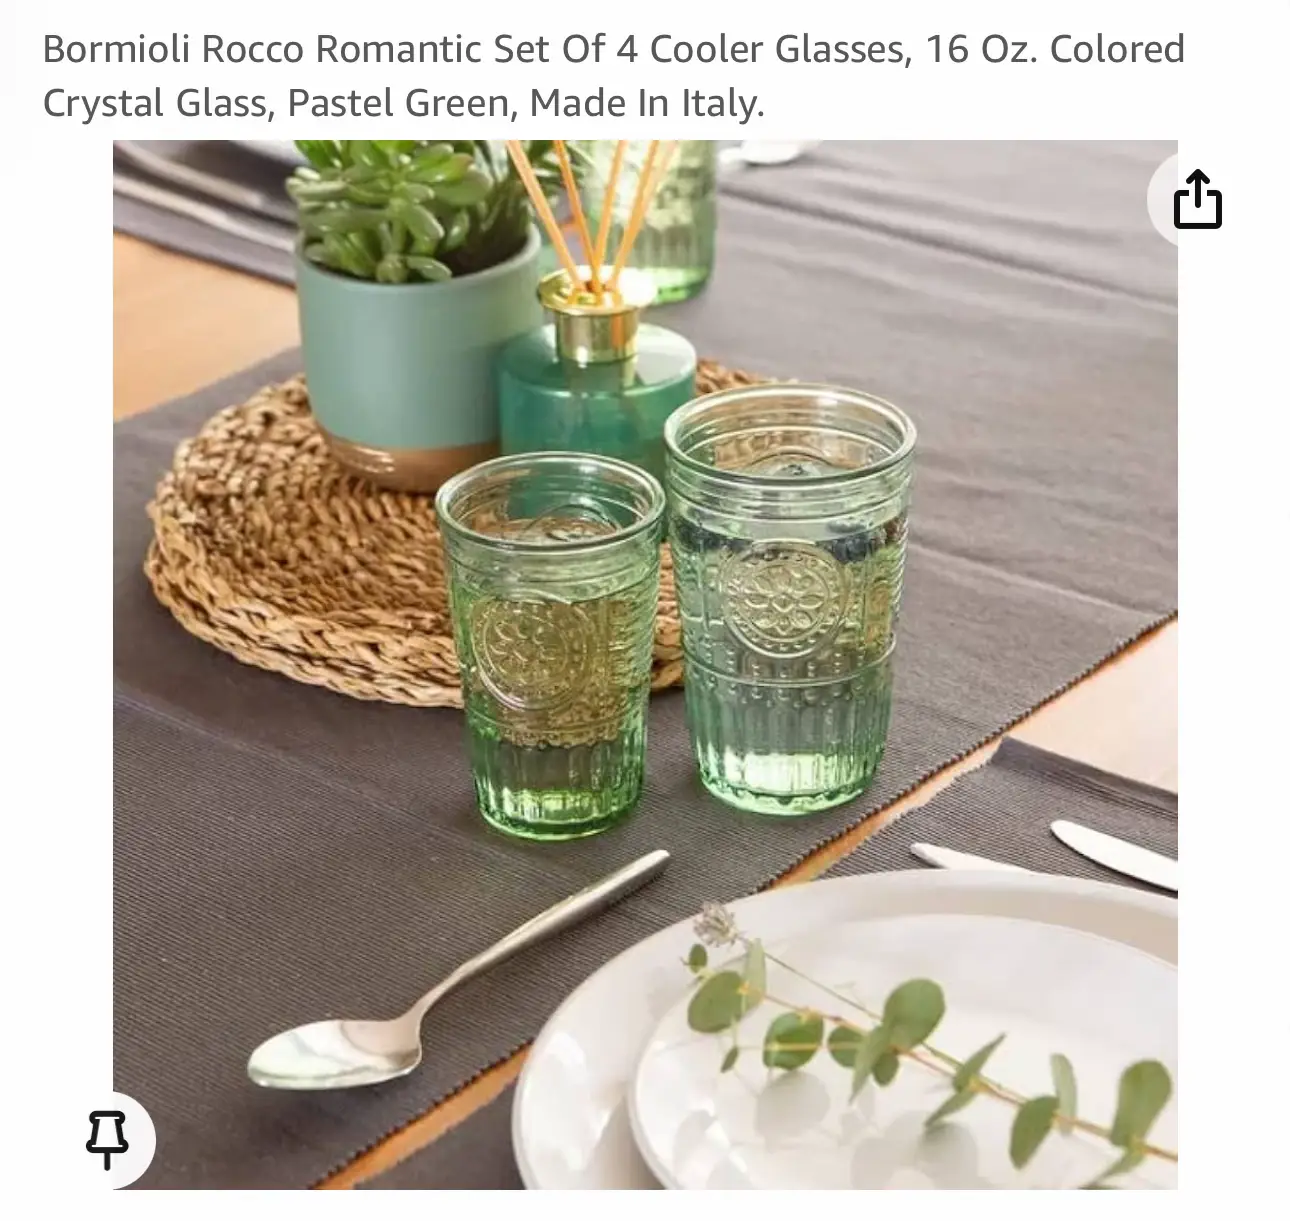 Bormioli Rocco Romantic Set Of 6 Cooler Glasses, 16 Oz. Colored Crystal  Glass, Pastel Green, Made In Italy 